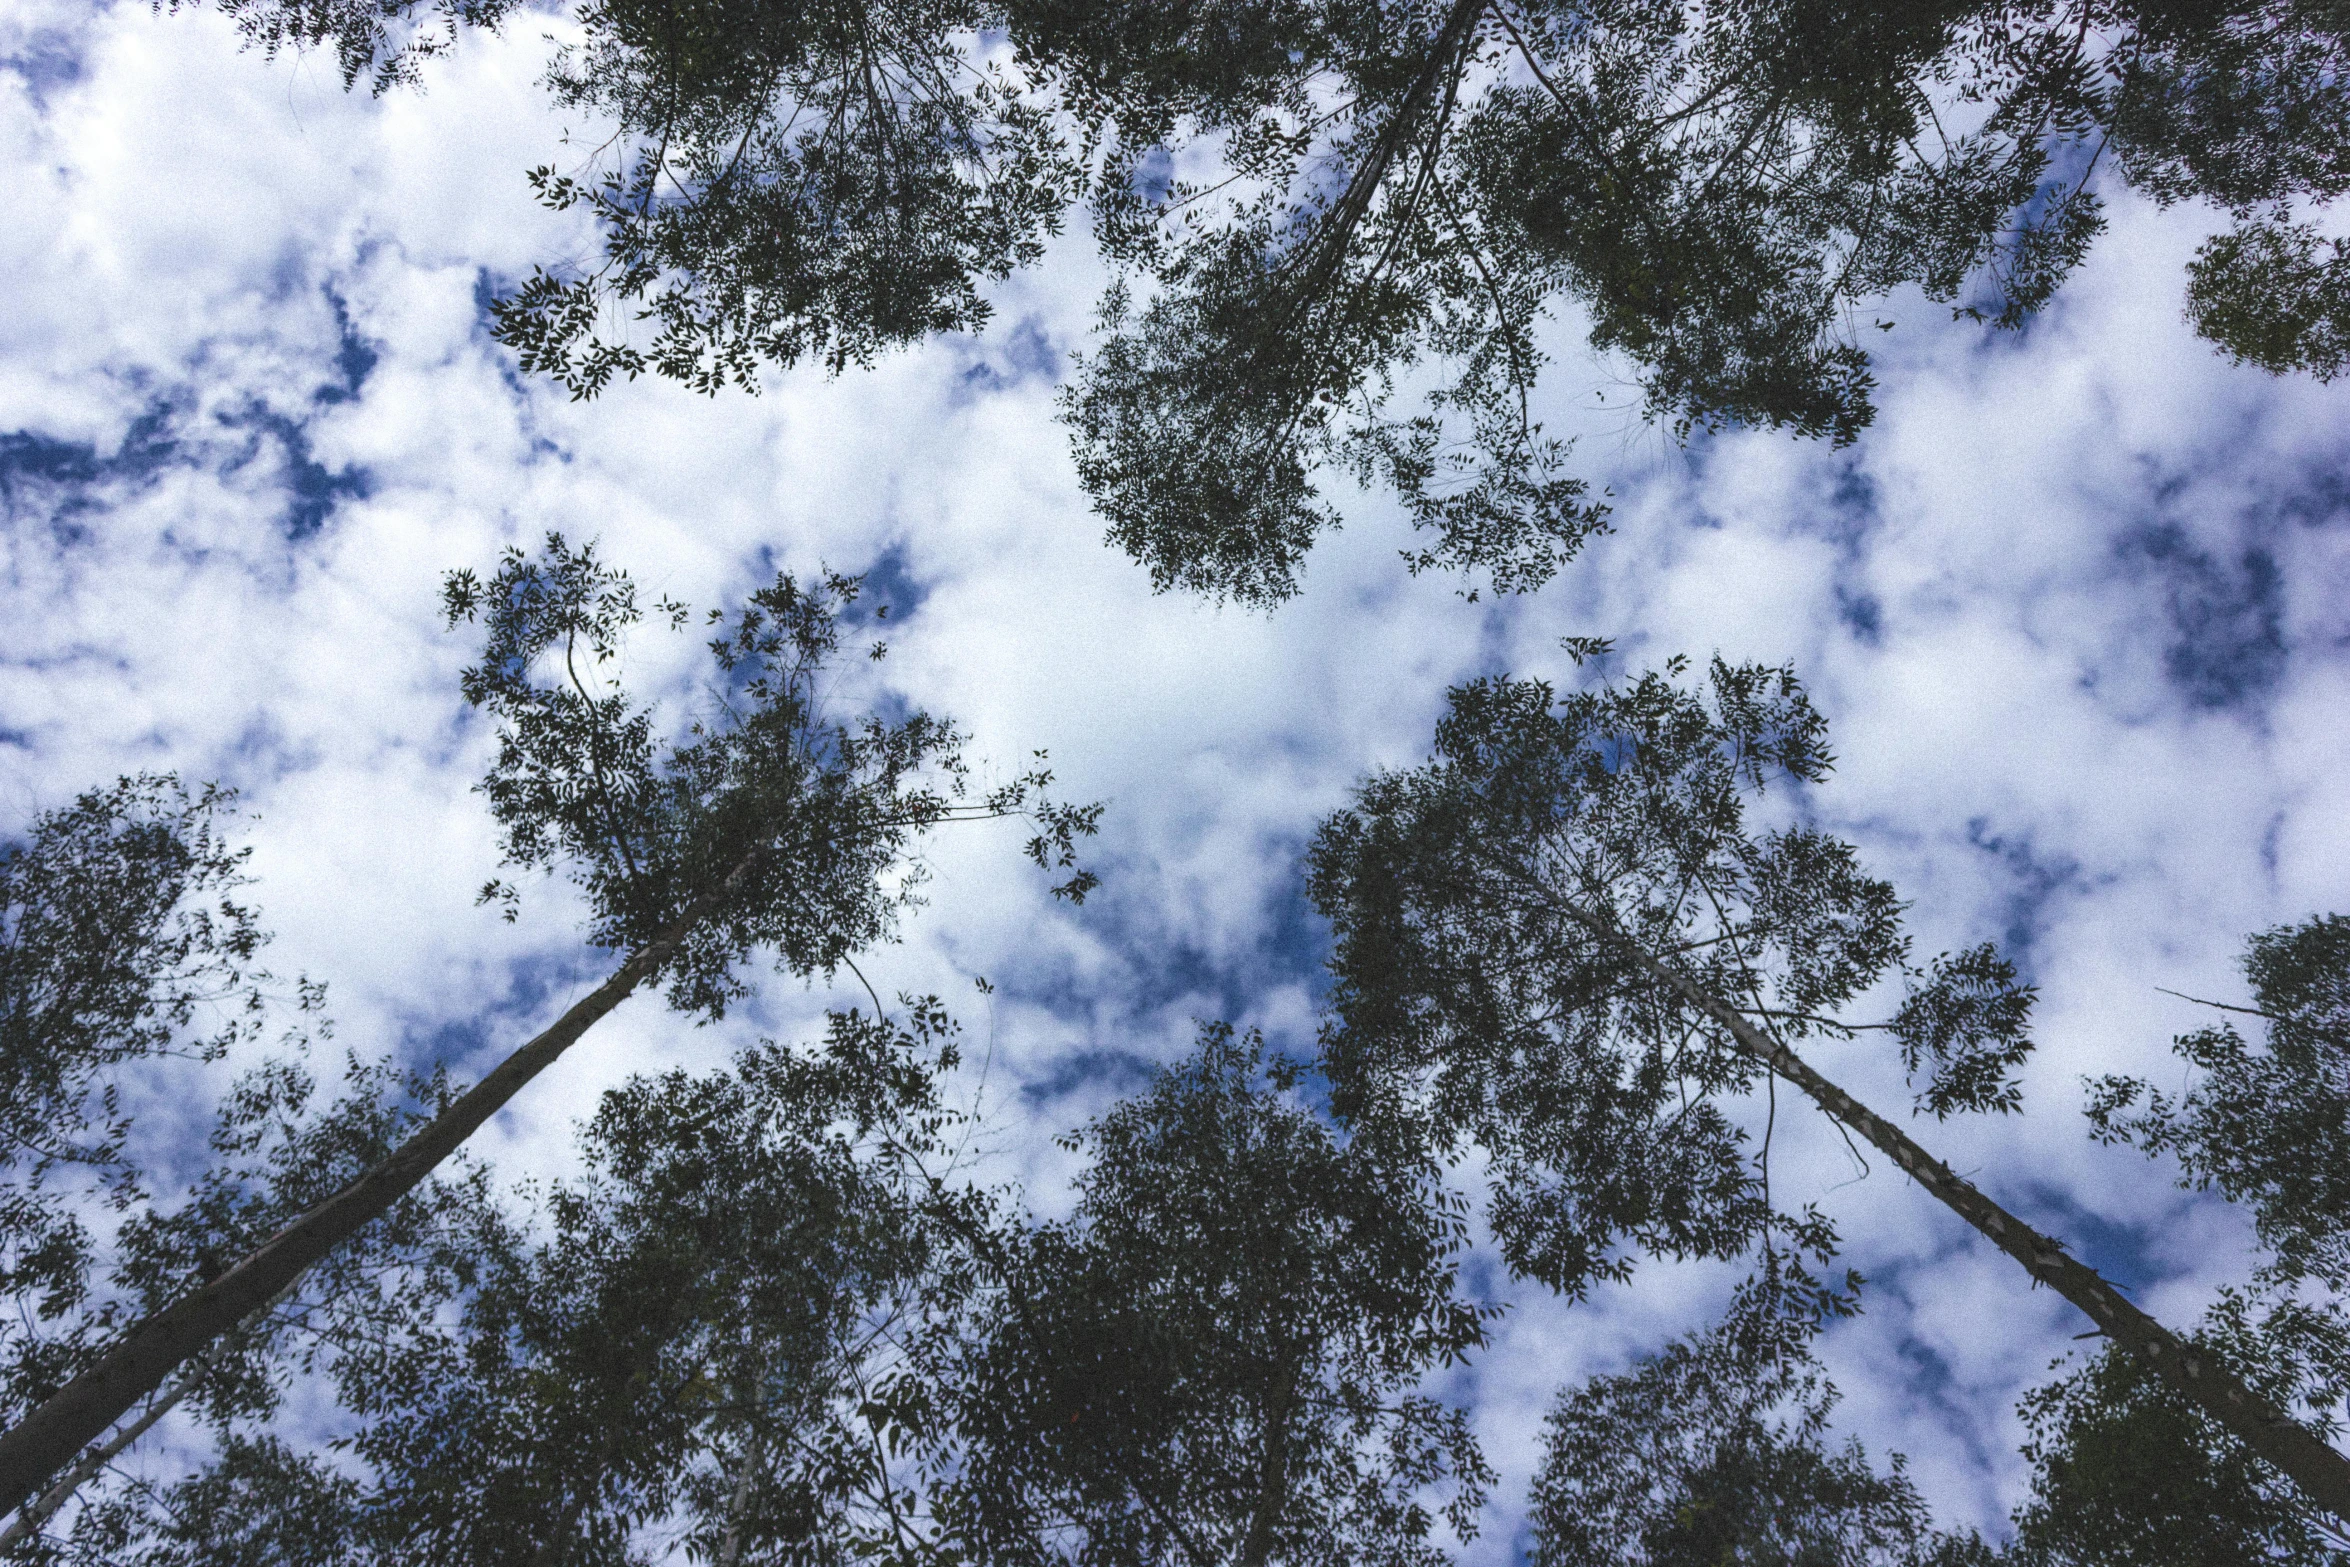 looking up at the underside of a group of trees